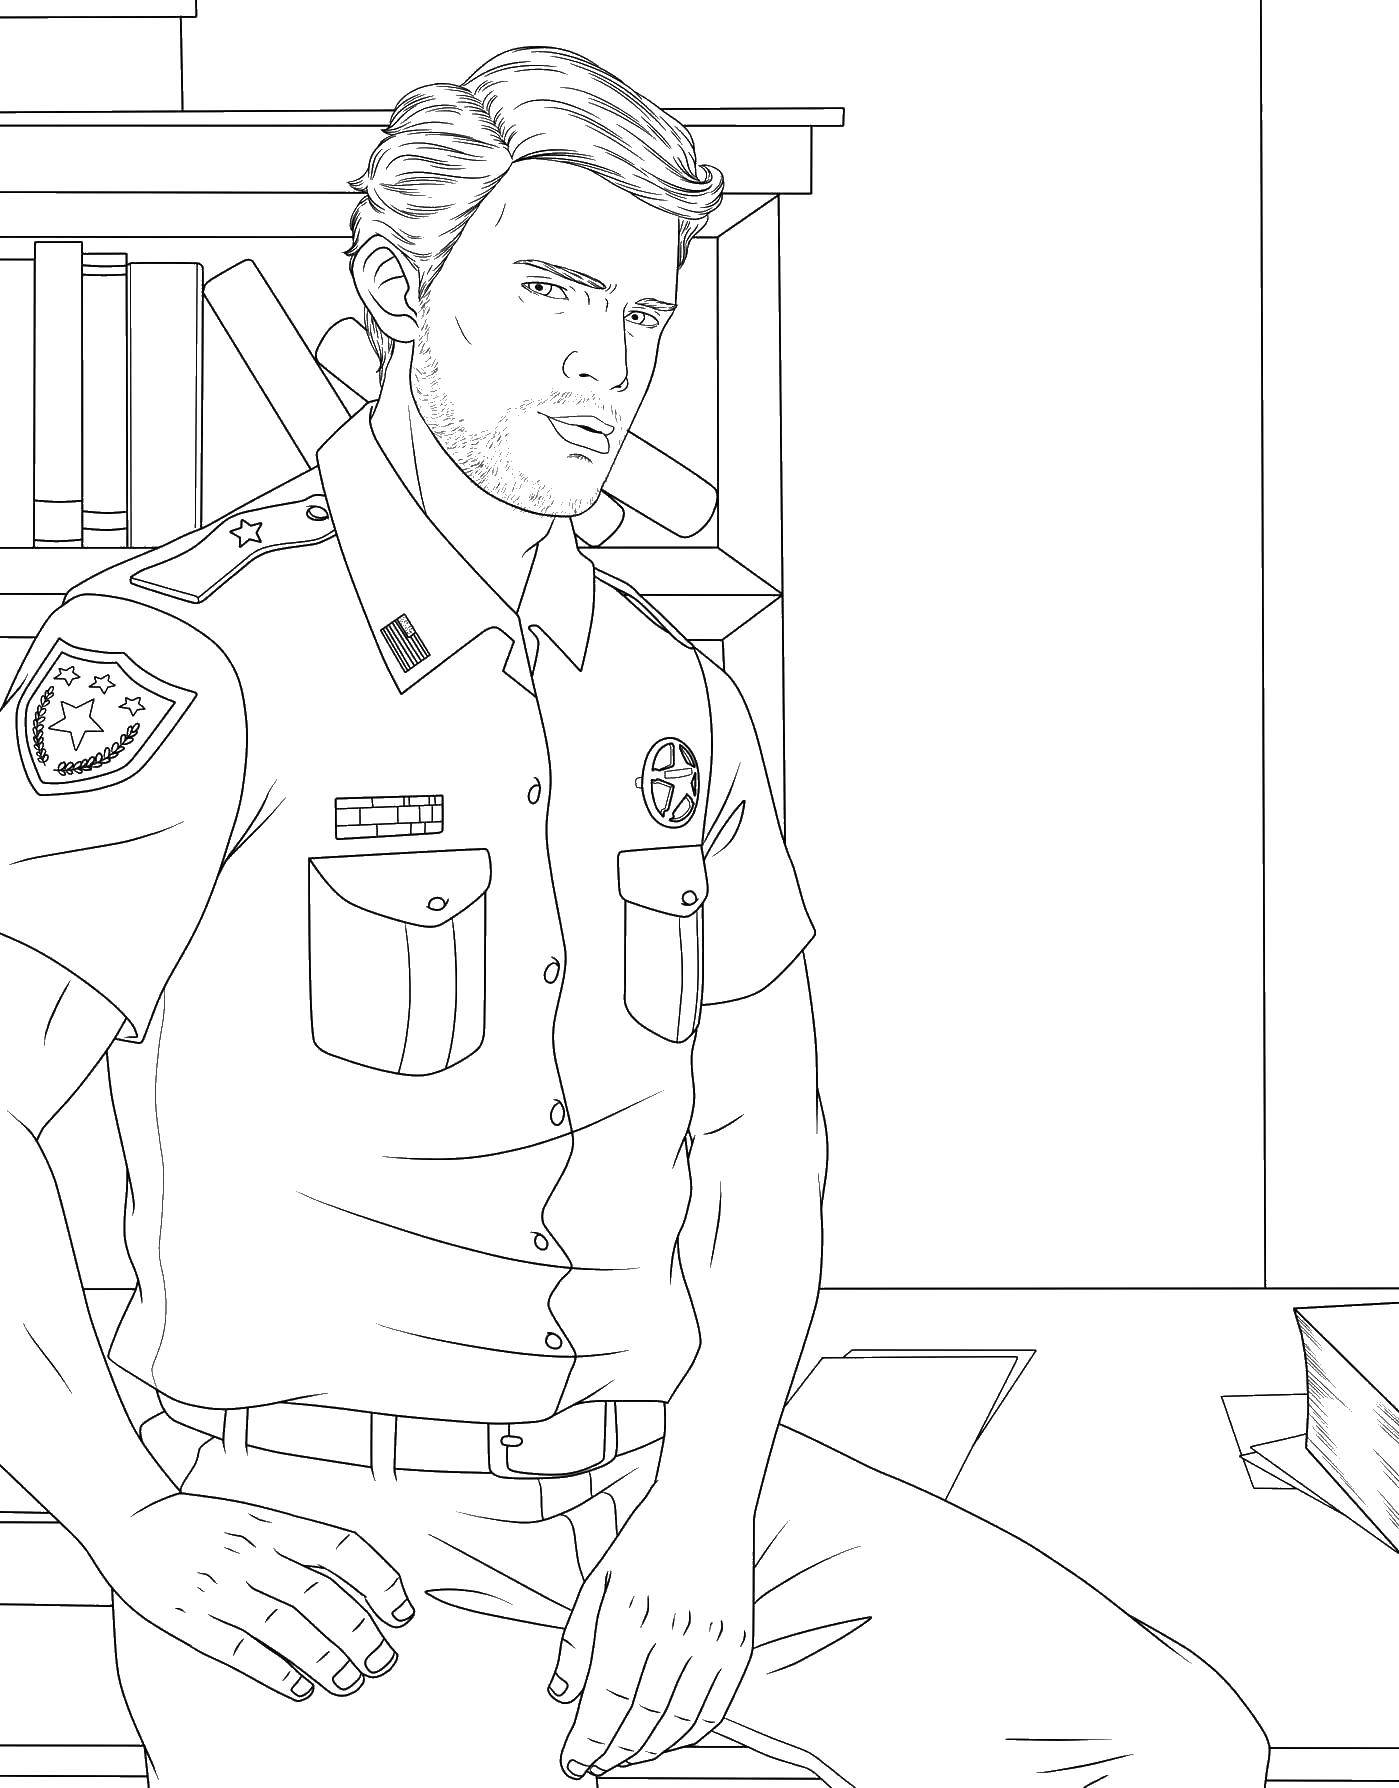 Coloring Police. Category police. Tags:  police, policeman.